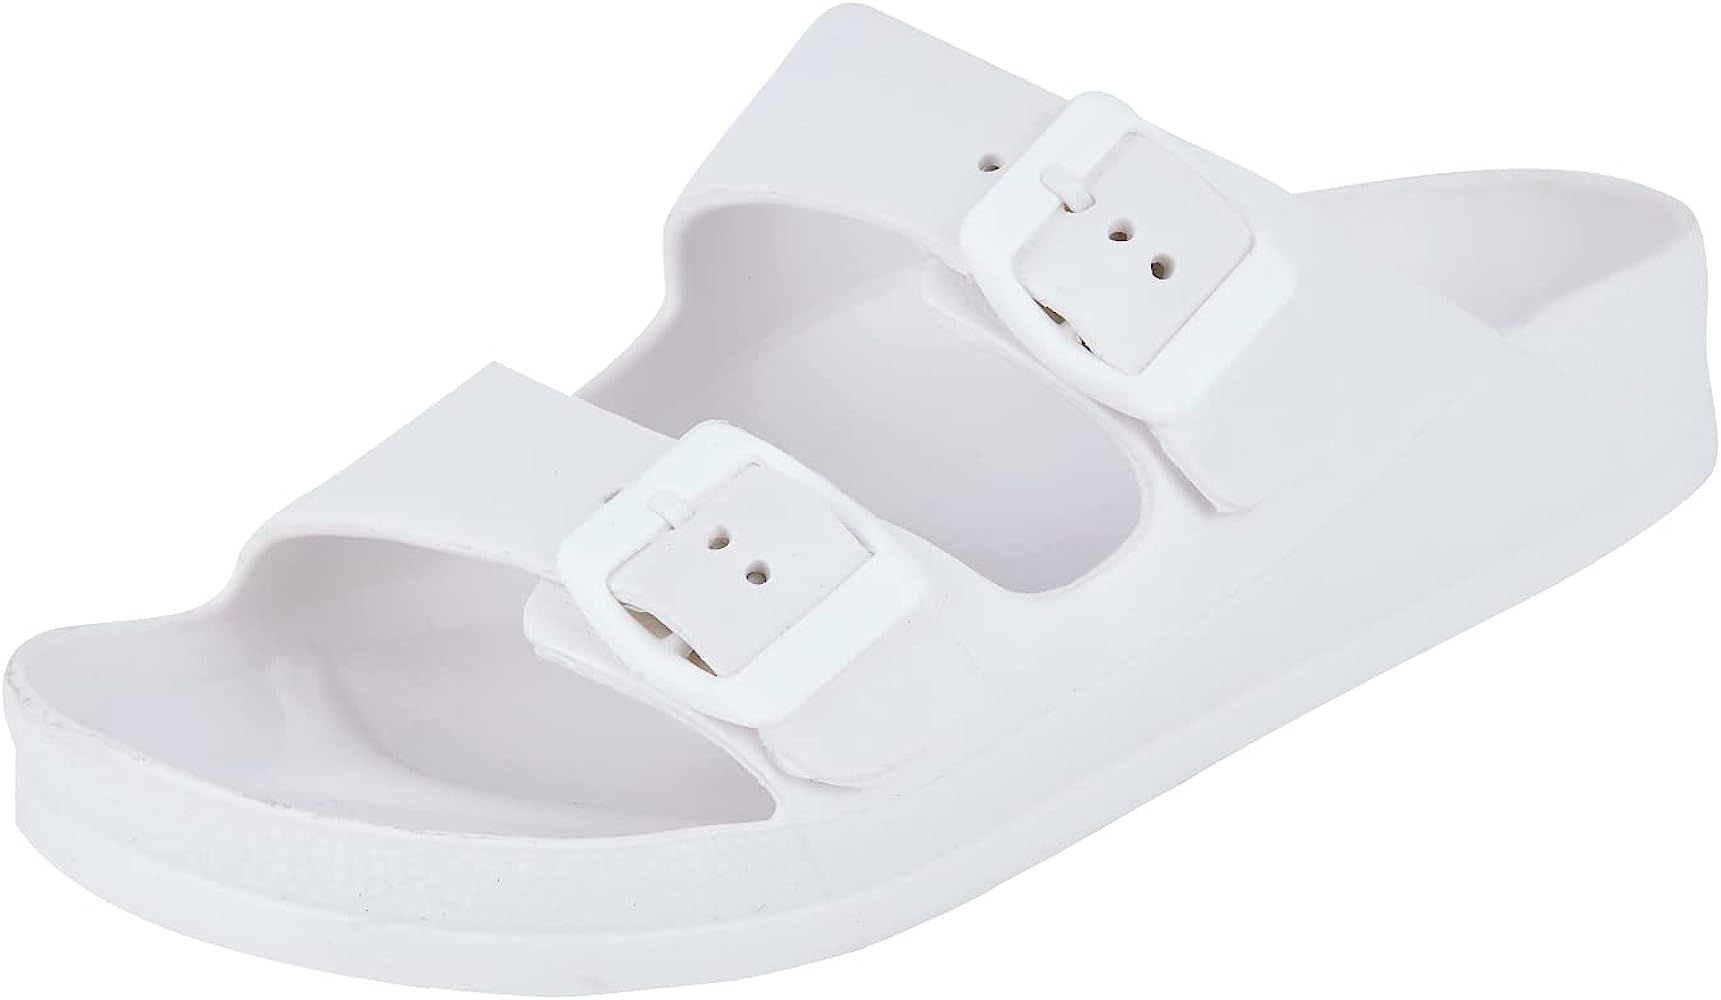 Comfort Slides with Adjustable Double Buckle Footbed Sandals | Amazon (CA)